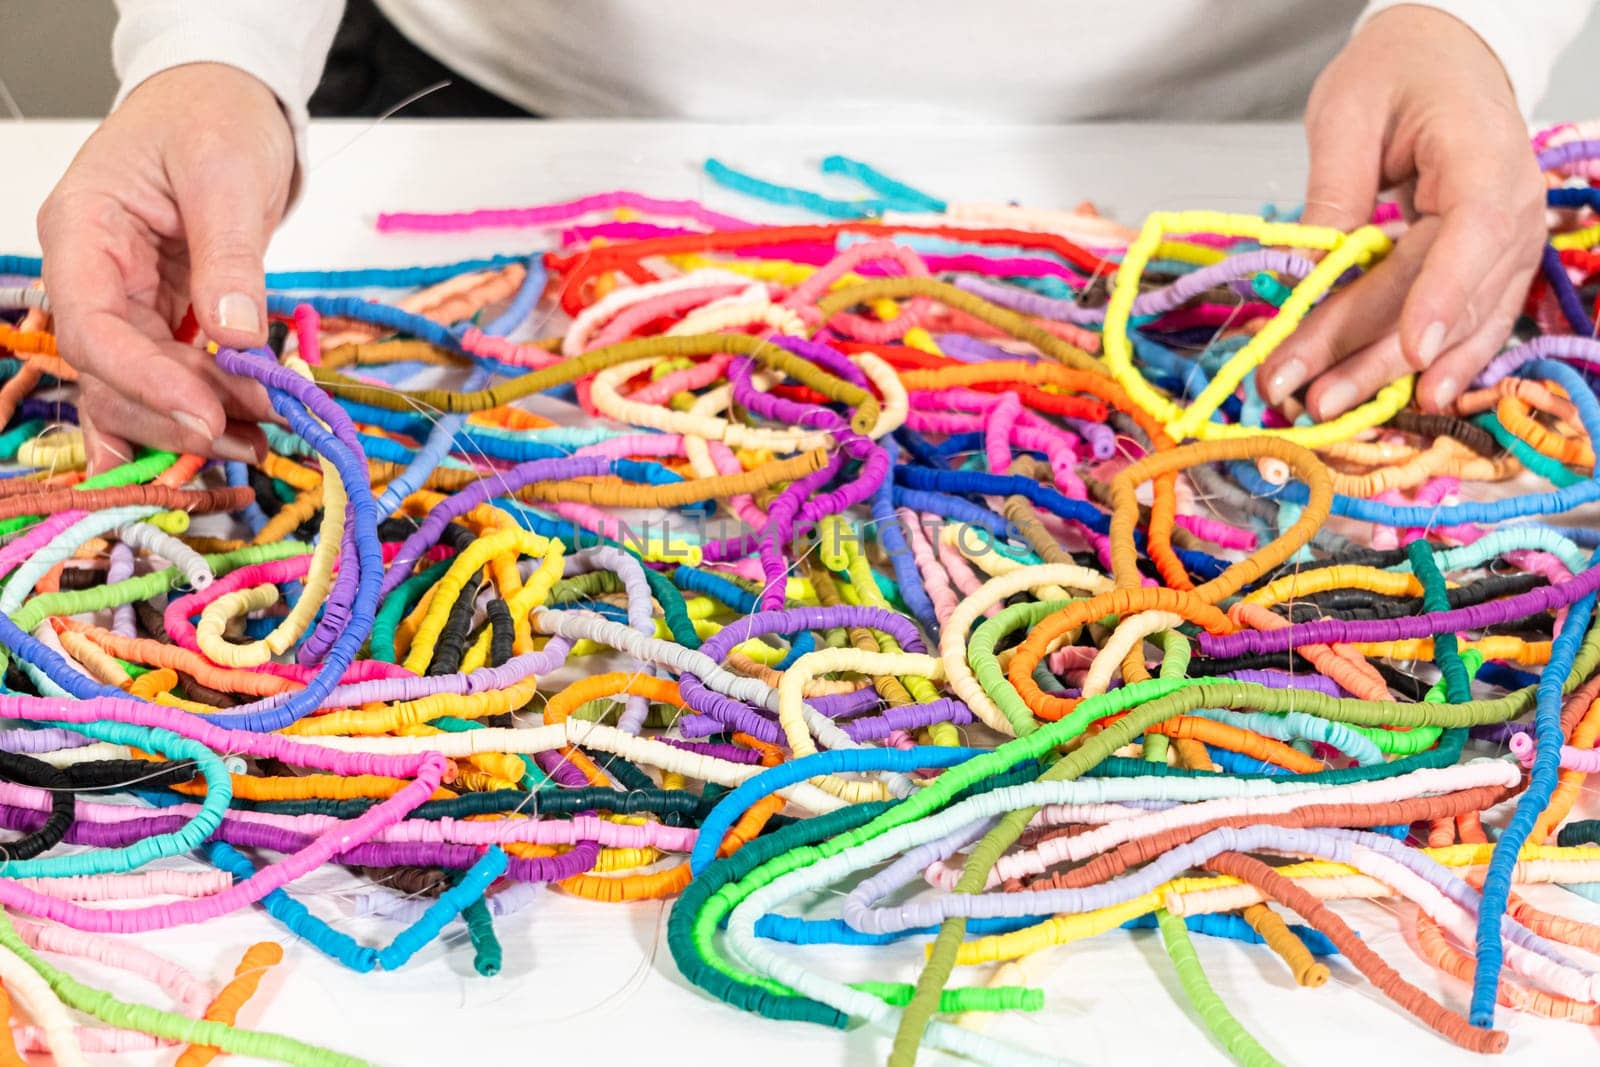 A vibrant collection of clay beads, neatly arranged by color on a white table, ready to inspire young crafters to create their own unique bracelets.